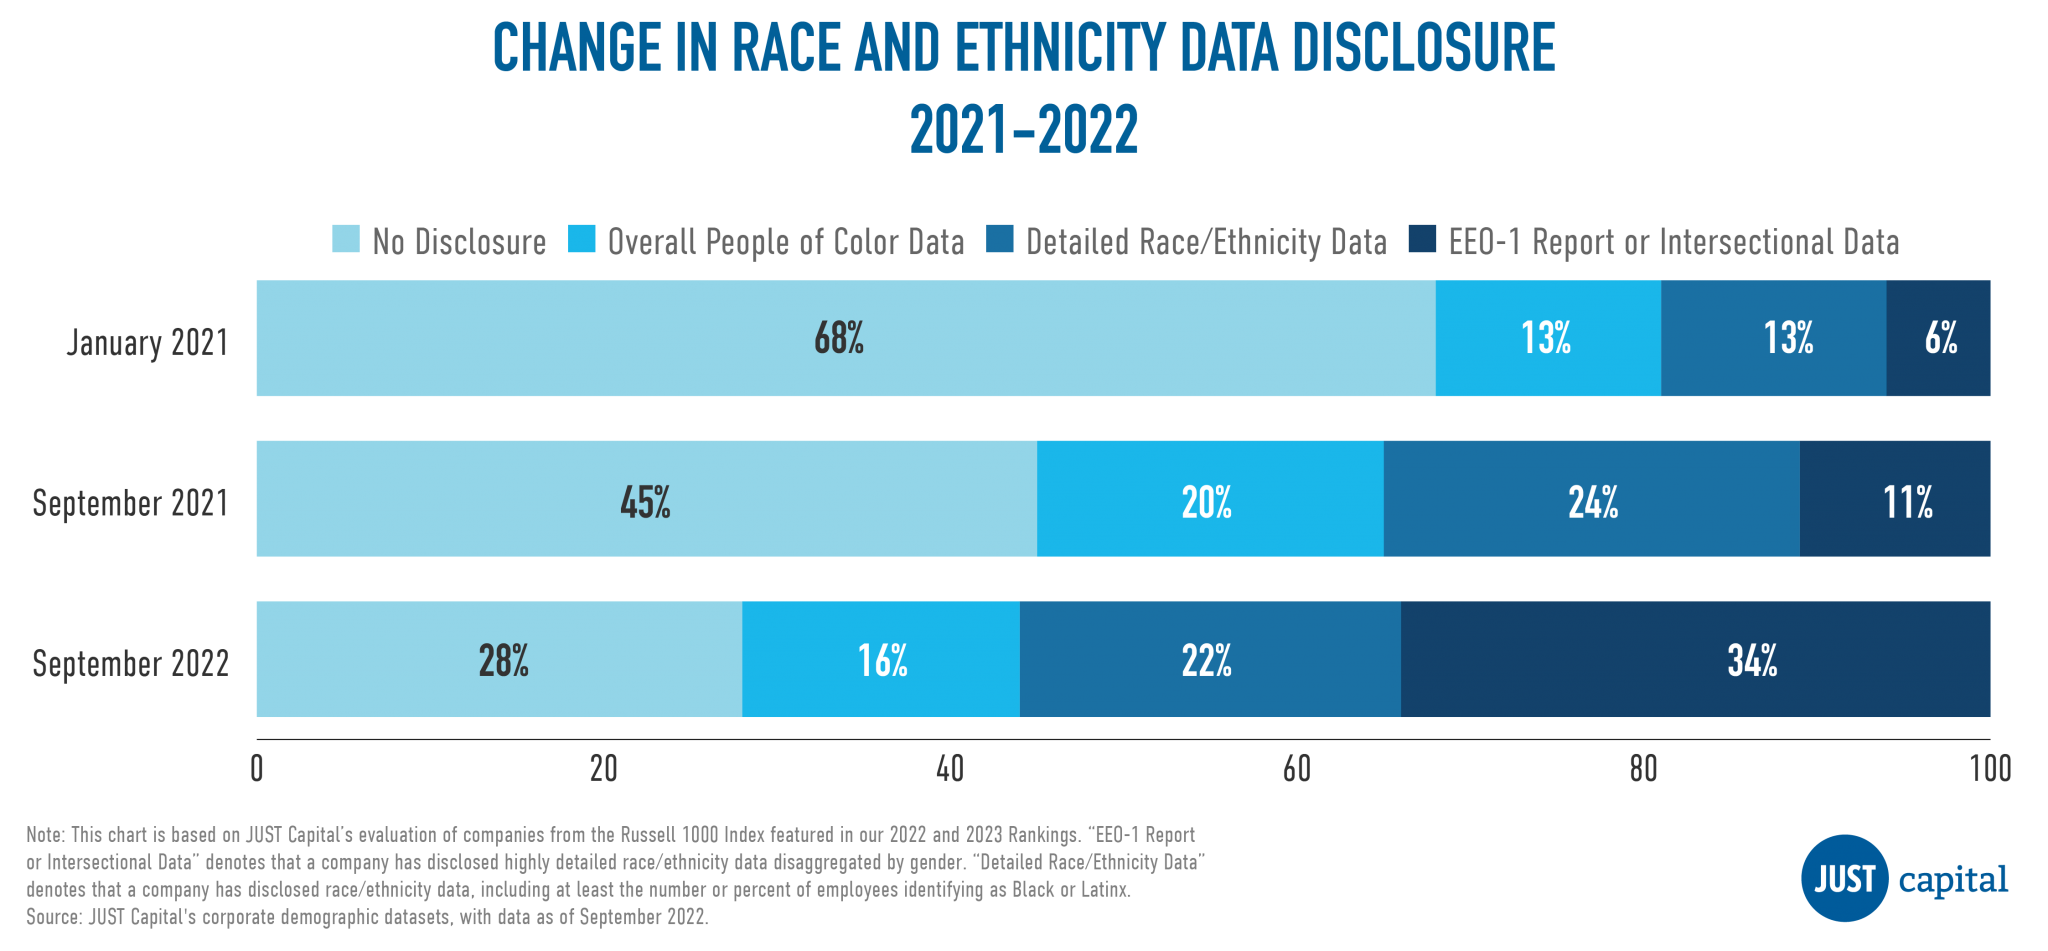 companies making diversity disclosures about their workforce has increased rapidly since 2021